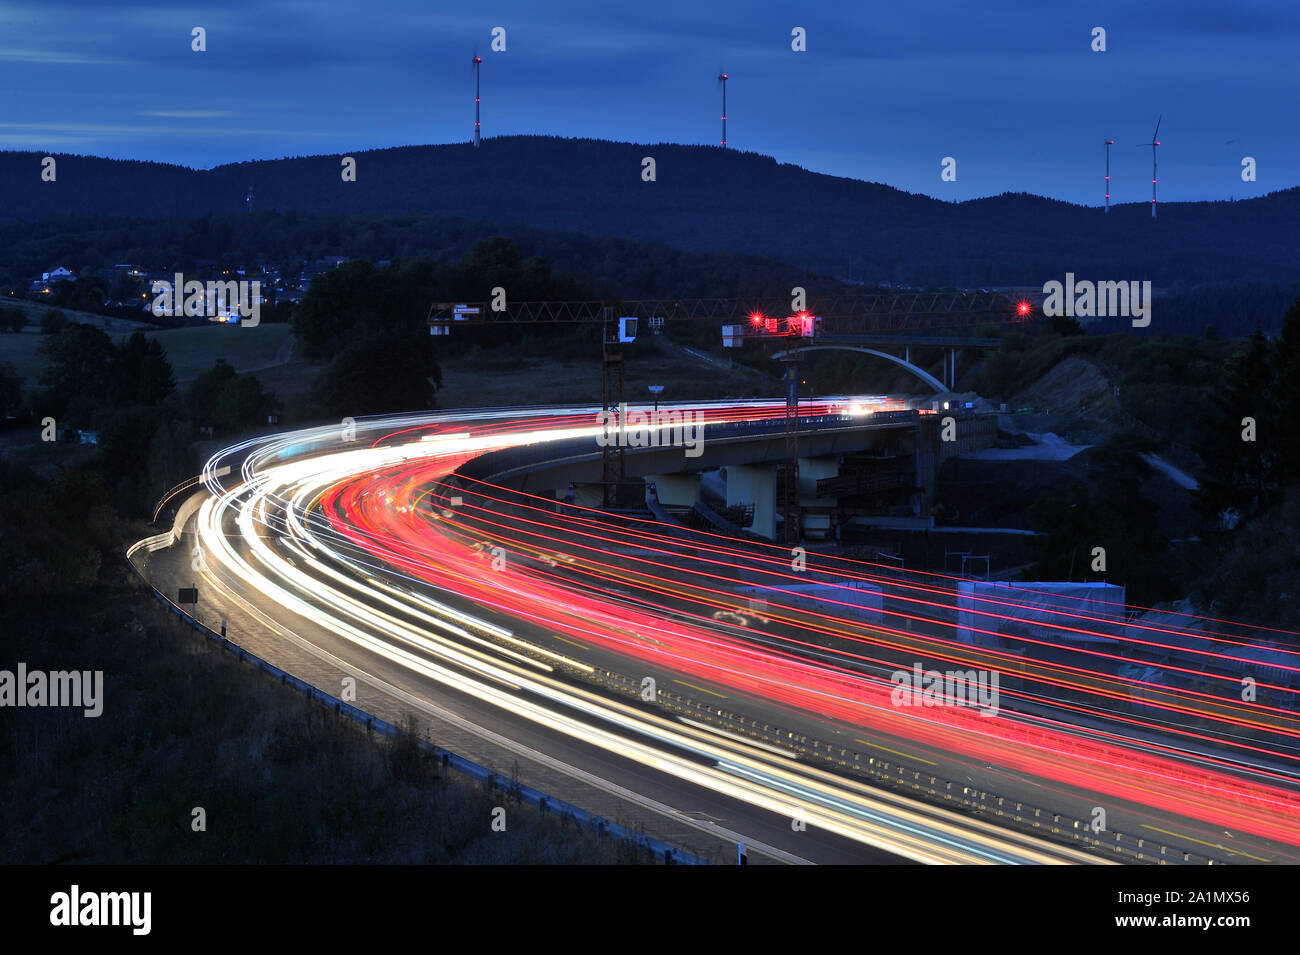 Traffic on a highway bridge at nigth (A45, Dillenburg, Germany) Stock Photo